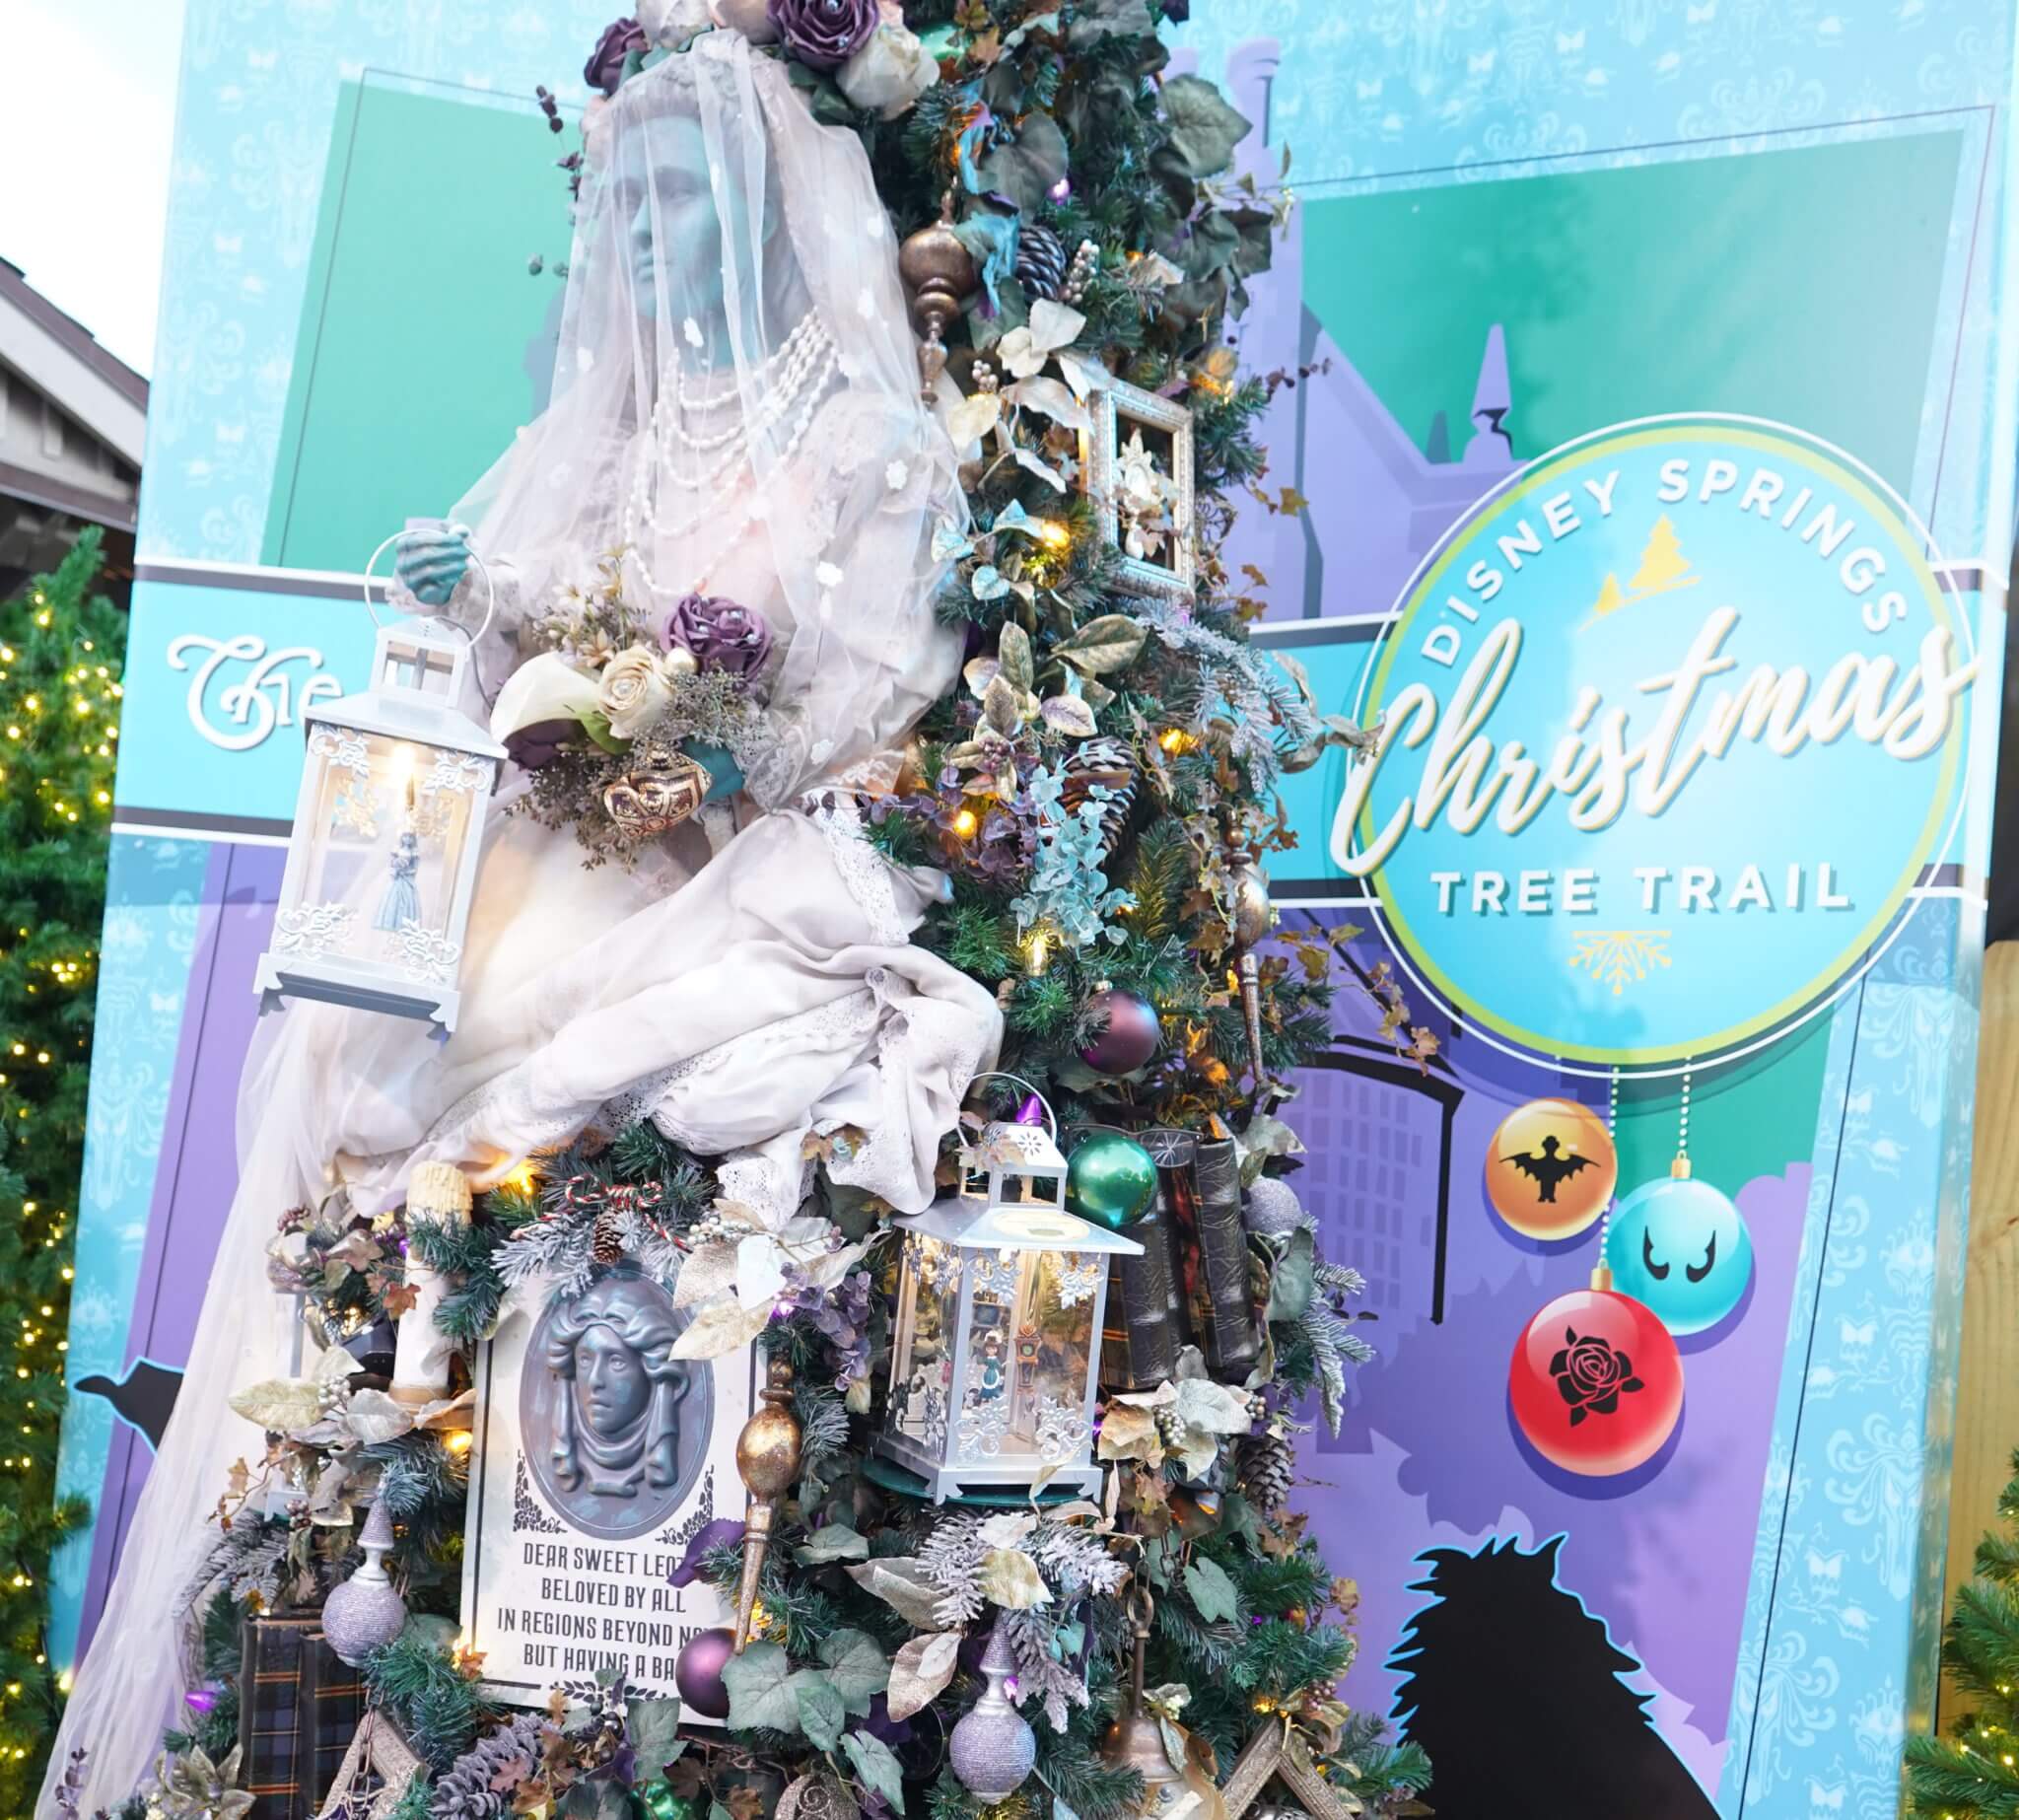 Haunted Mansion Bride in Christmas Tree Trail at Disney Springs